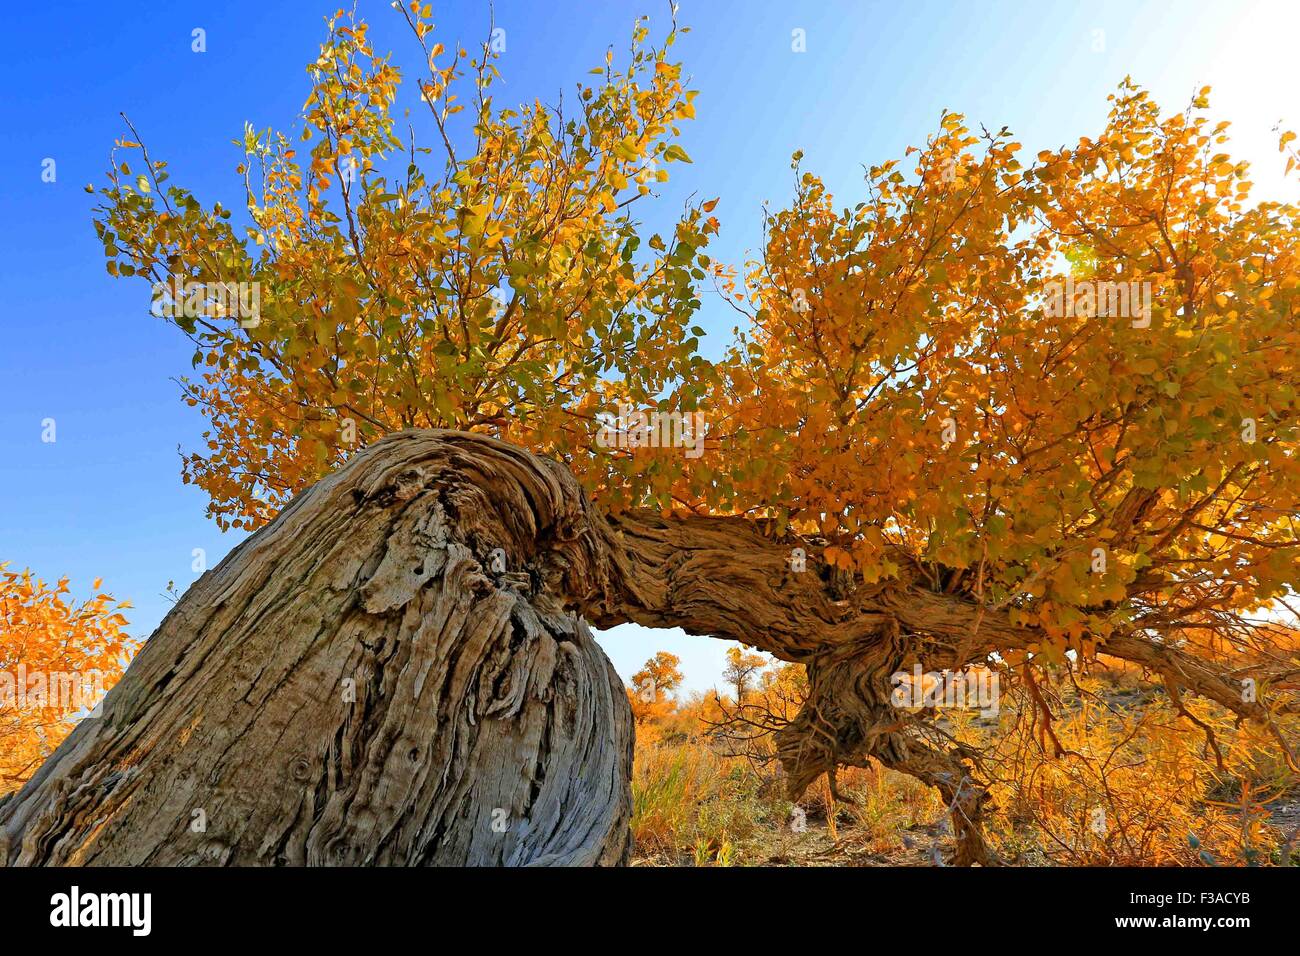 (151003) -- HAMI, Oct. 3, 2015 (Xinhua) -- Populus diversifolia trees are seen at Nom of Yiwu County of Hami, northwest China's Xinjiang Uygur Autonomous Region, Oct. 3, 2015. Autumn is the best season in China to enjoy the golden colour of the populus diversifolia trees.    (Xinhua/Cai Zengle) (zhs) Stock Photo